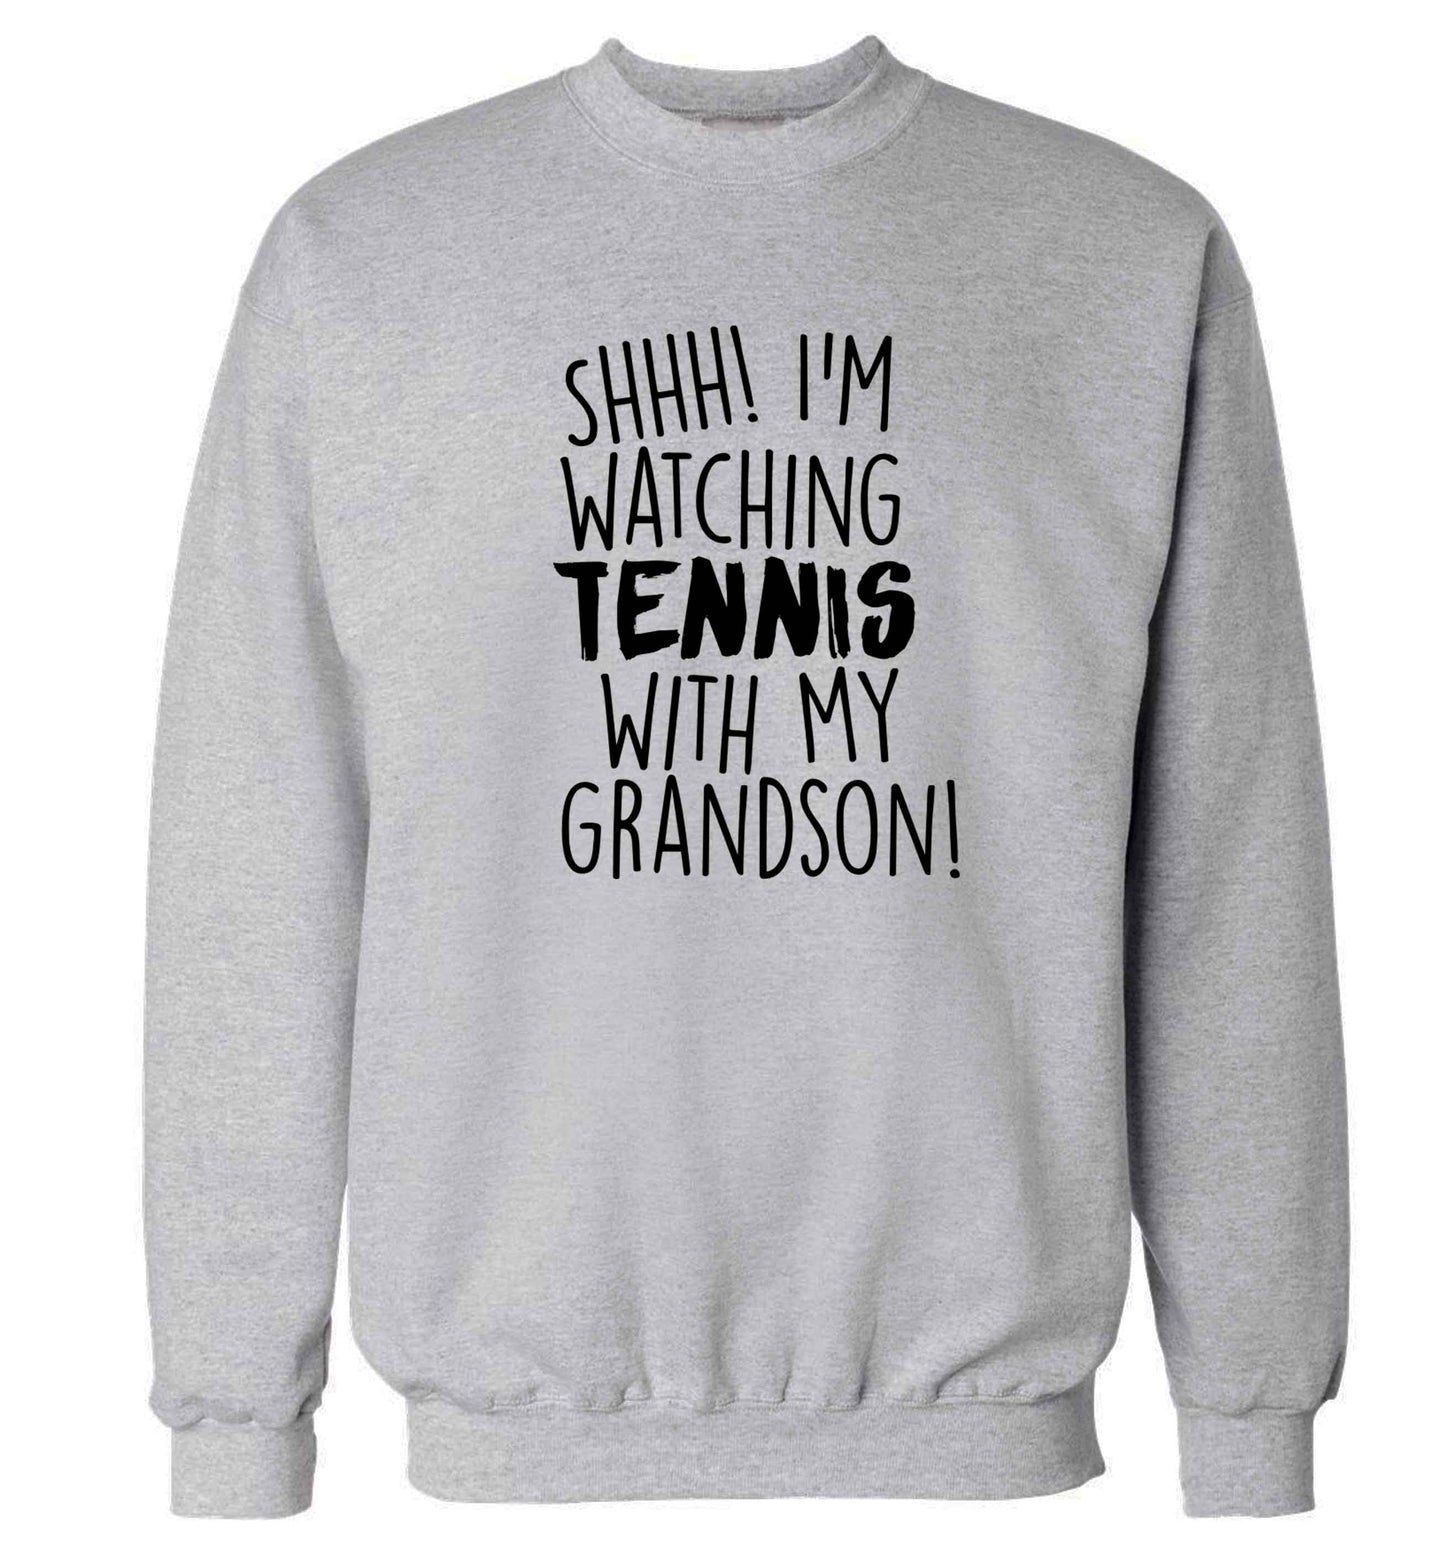 Shh! I'm watching tennis with my grandson! Adult's unisex grey Sweater 2XL